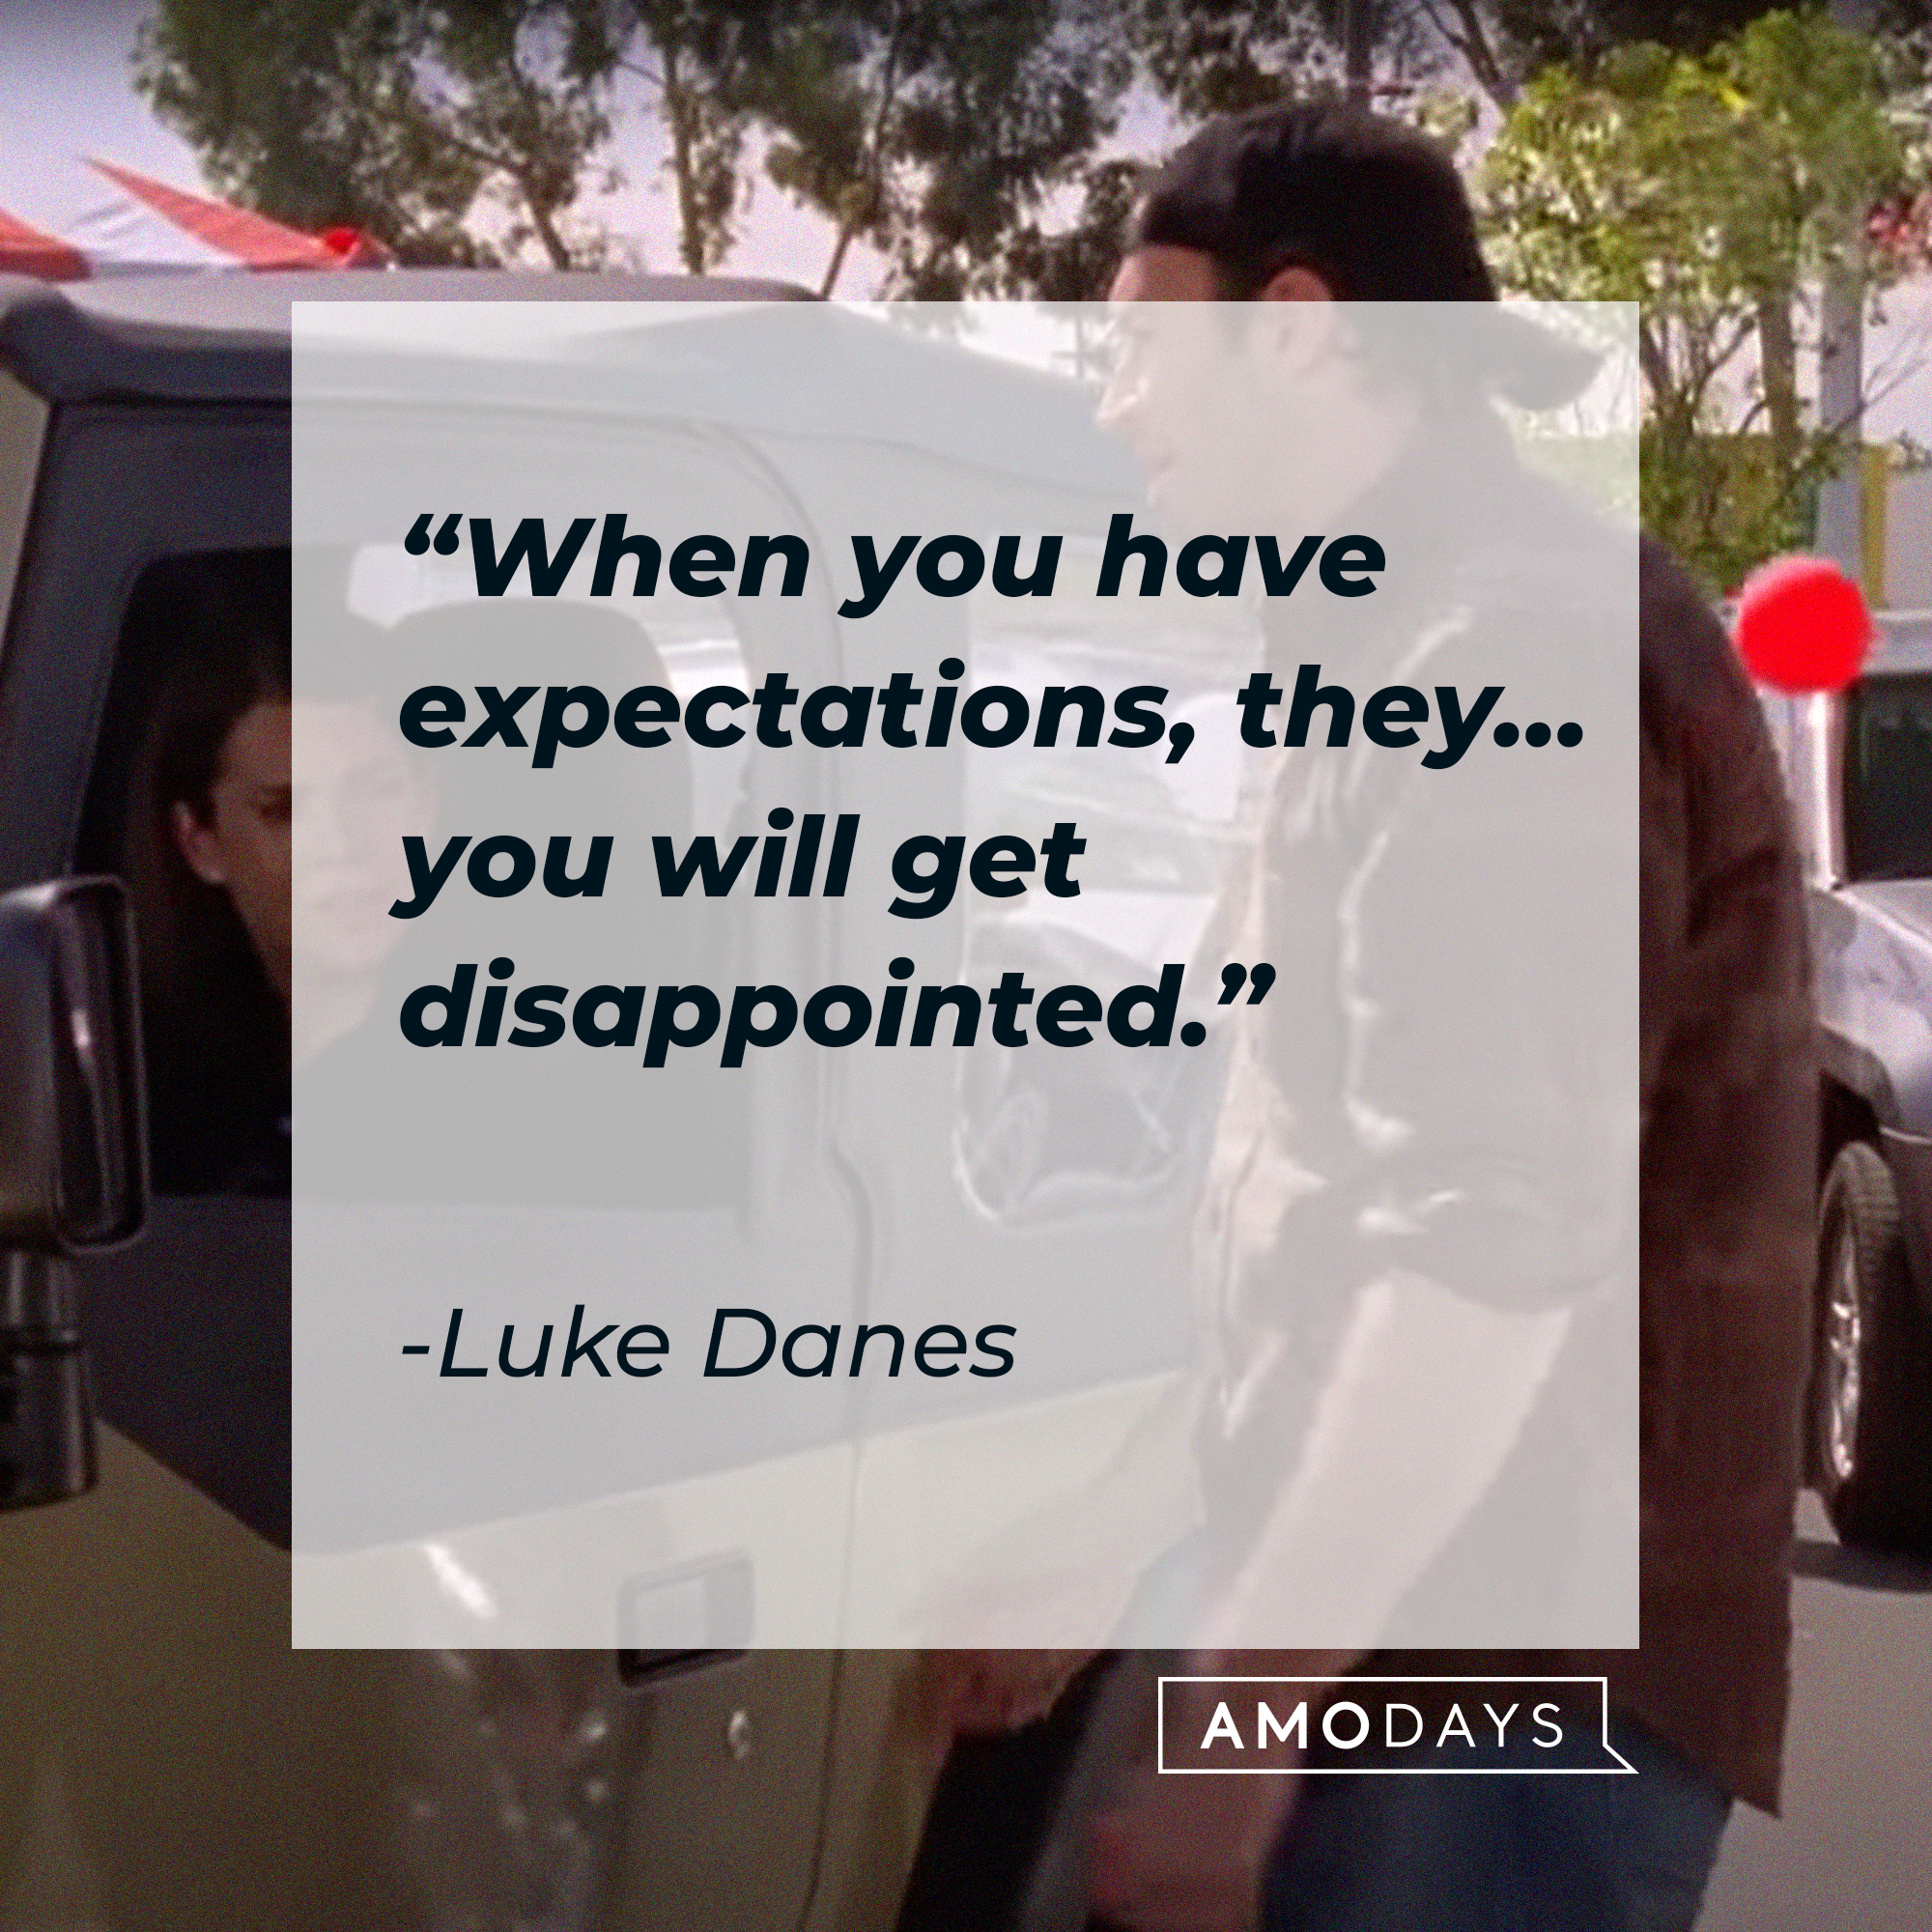 Luke Danes, with his quote: “When you have expectations, they… you will get disappointed.” |Source: facebook.com/GilmoreGirls